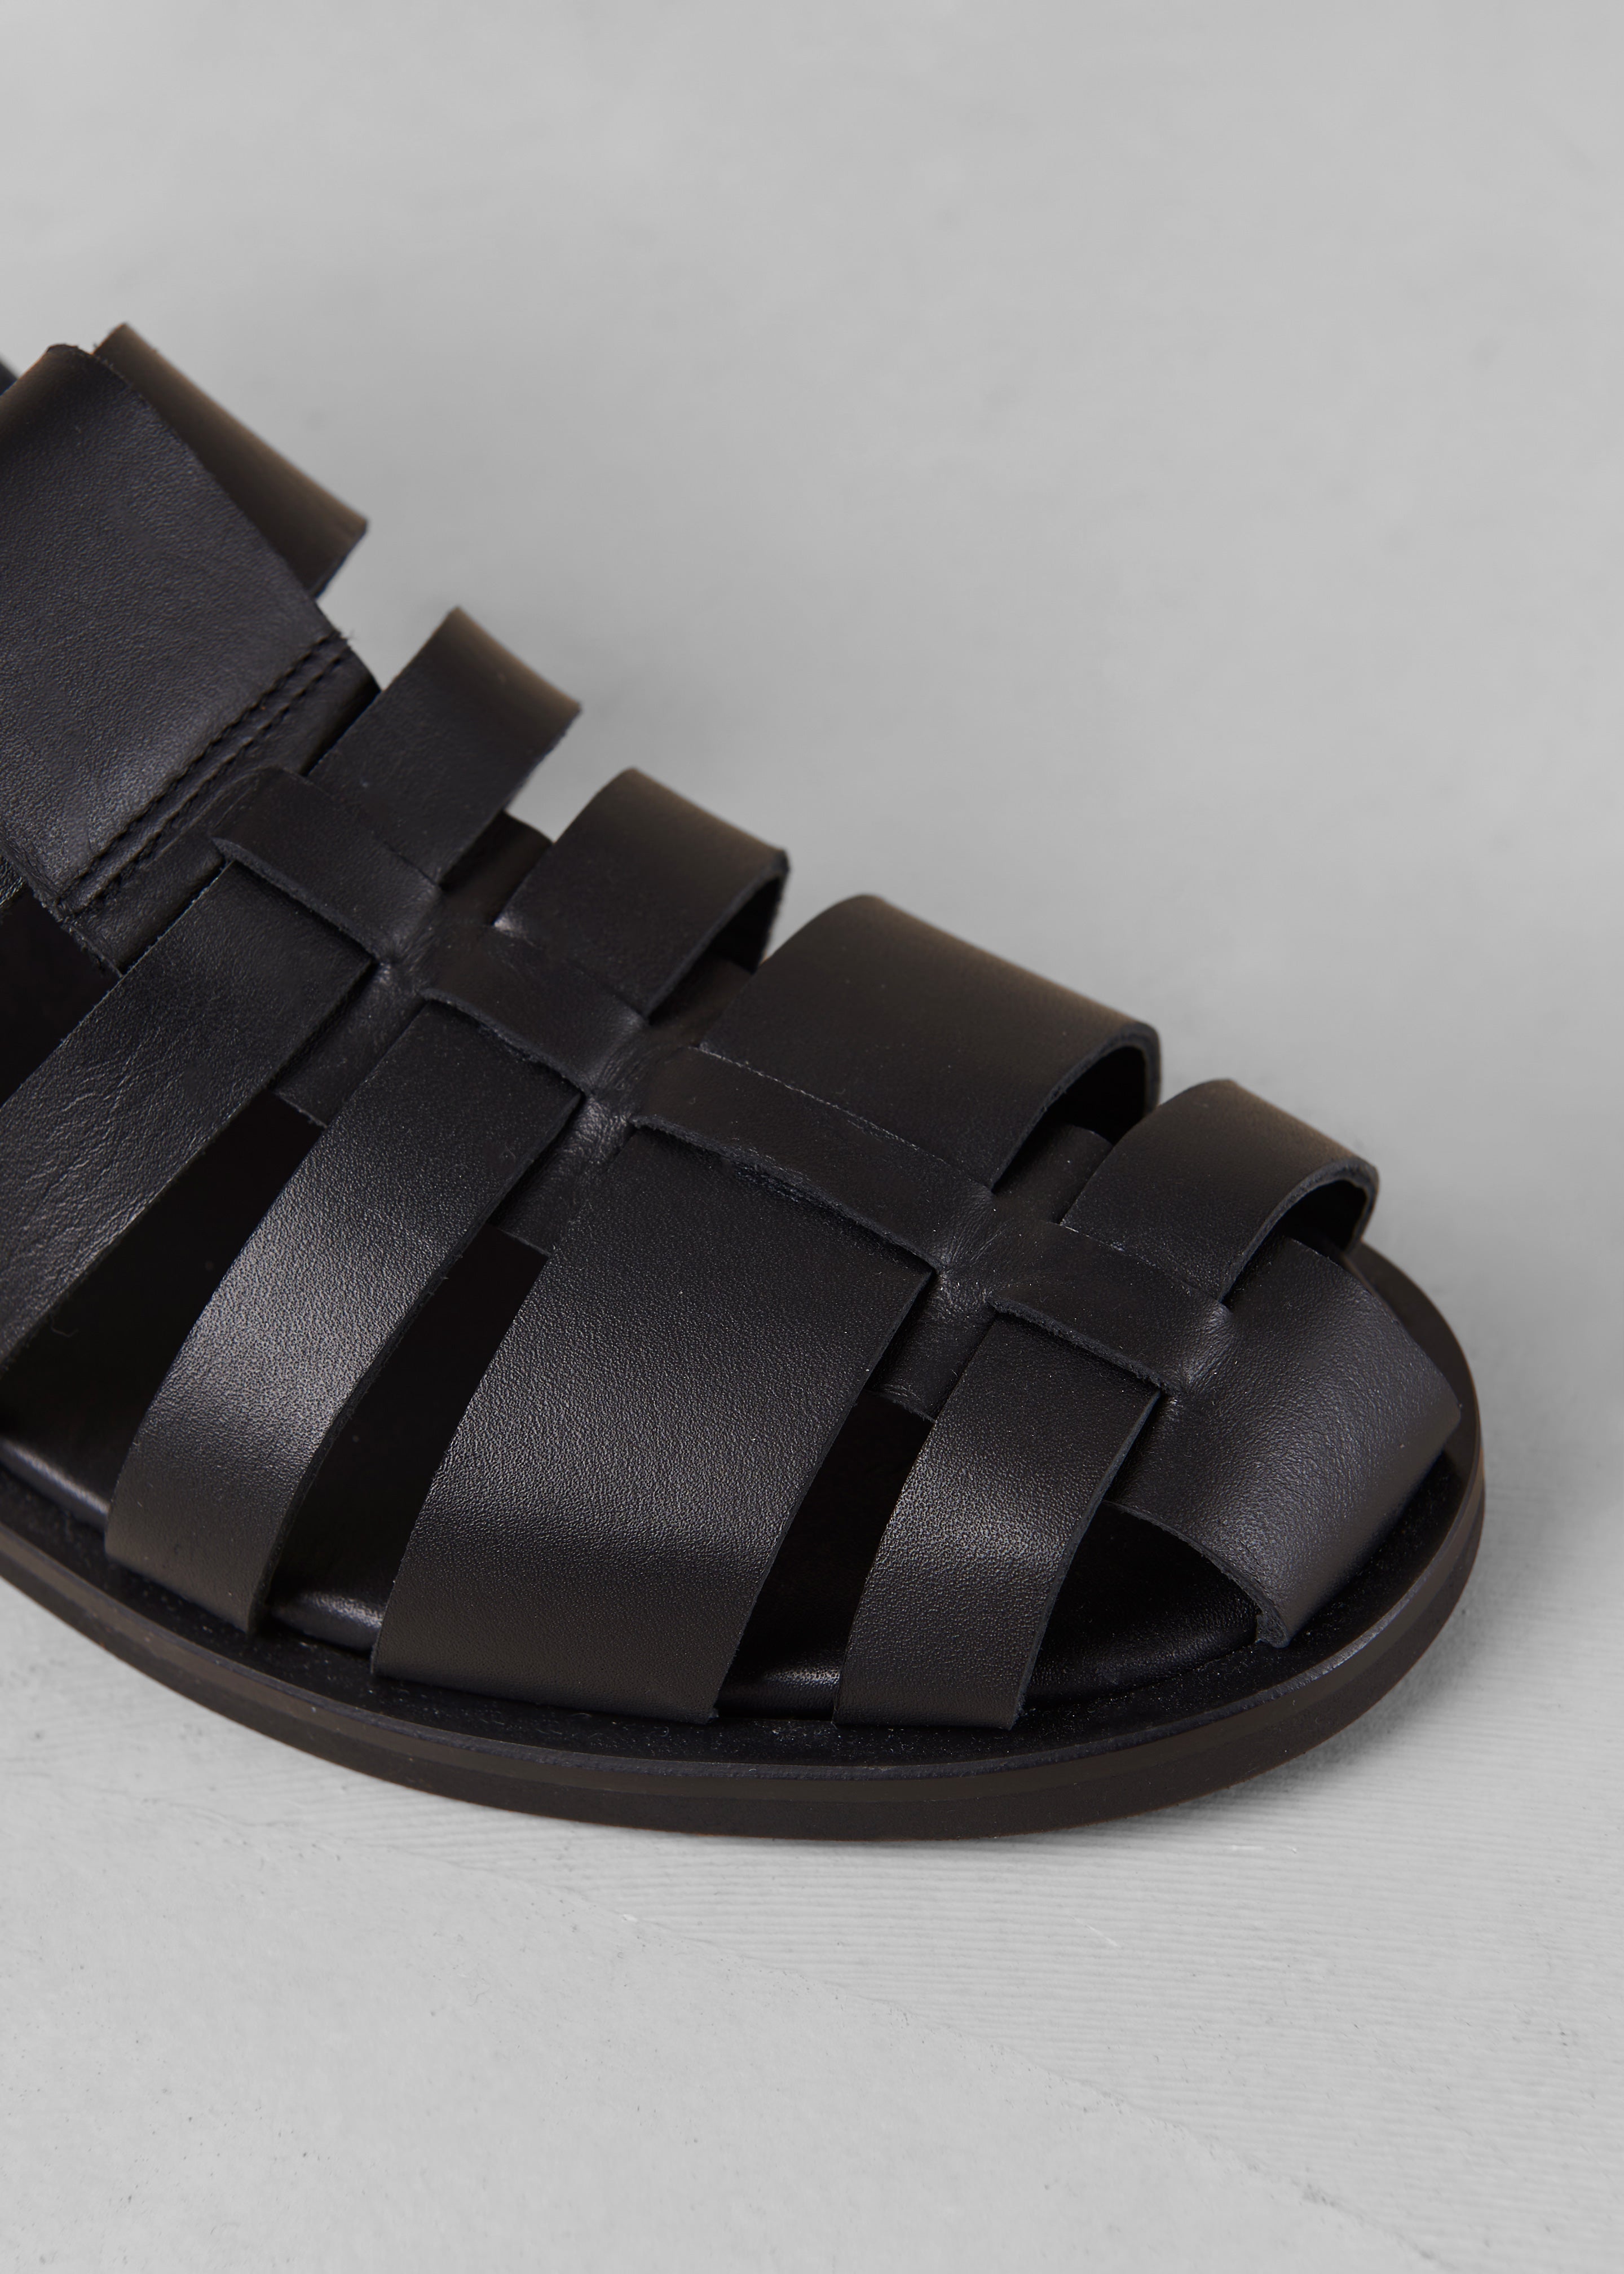 Alohas Perry Leather Sandals - Black - 4